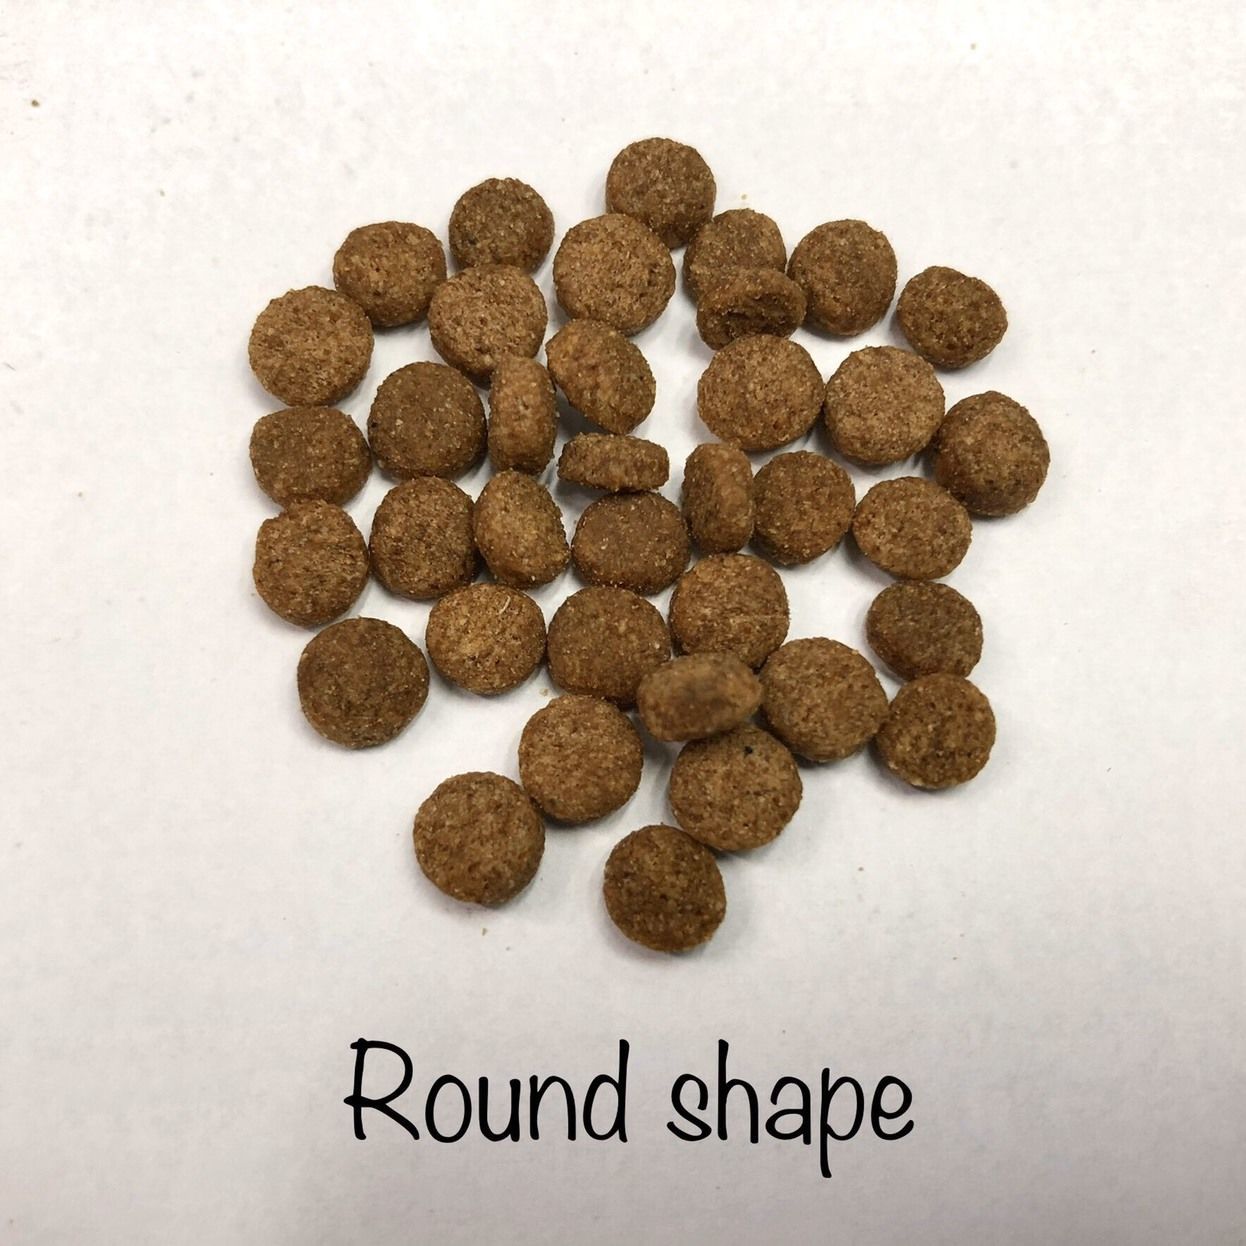 Thailand factory dog food dog food Puppy and small dog breeds Weight : 500 g , 1 kg , 3.5 kg , 20 kg Guaranteed analysis ; Protein 26% Fat 7% Fiber 5% Moisture 10% All our product is made with high qu